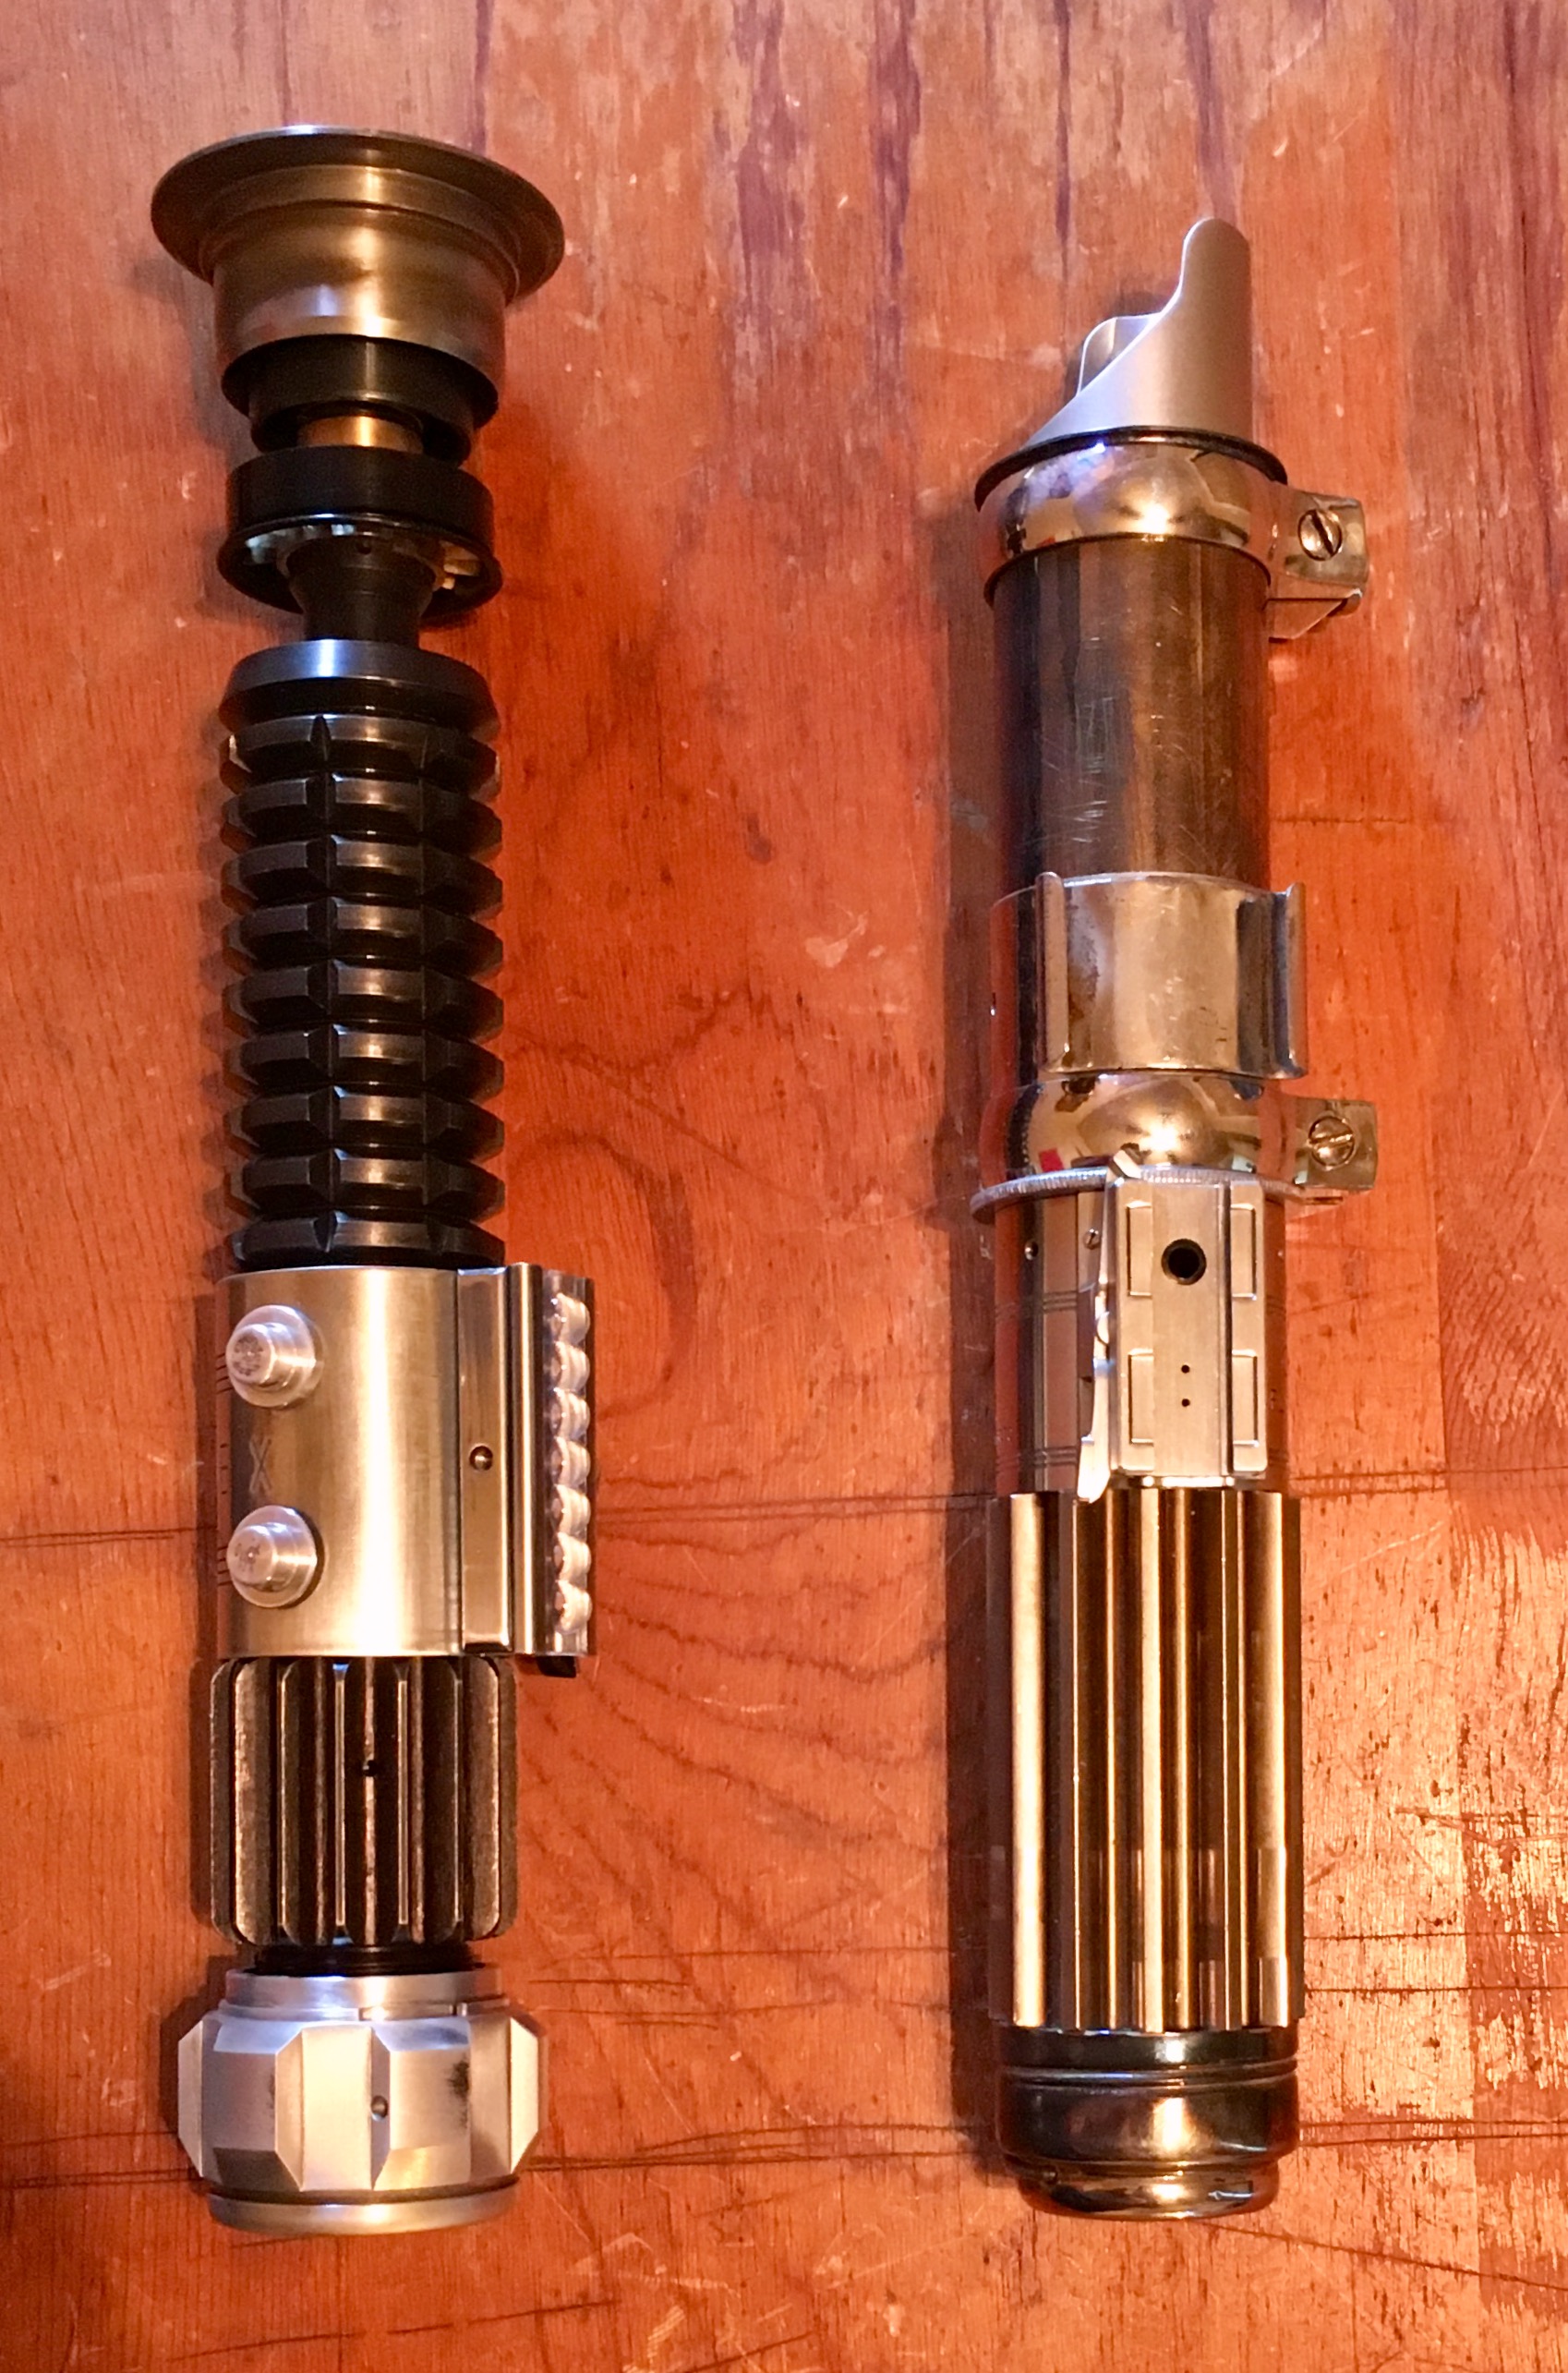 Here is a picture of the saber next to my Roman Props Obi Wan saber.